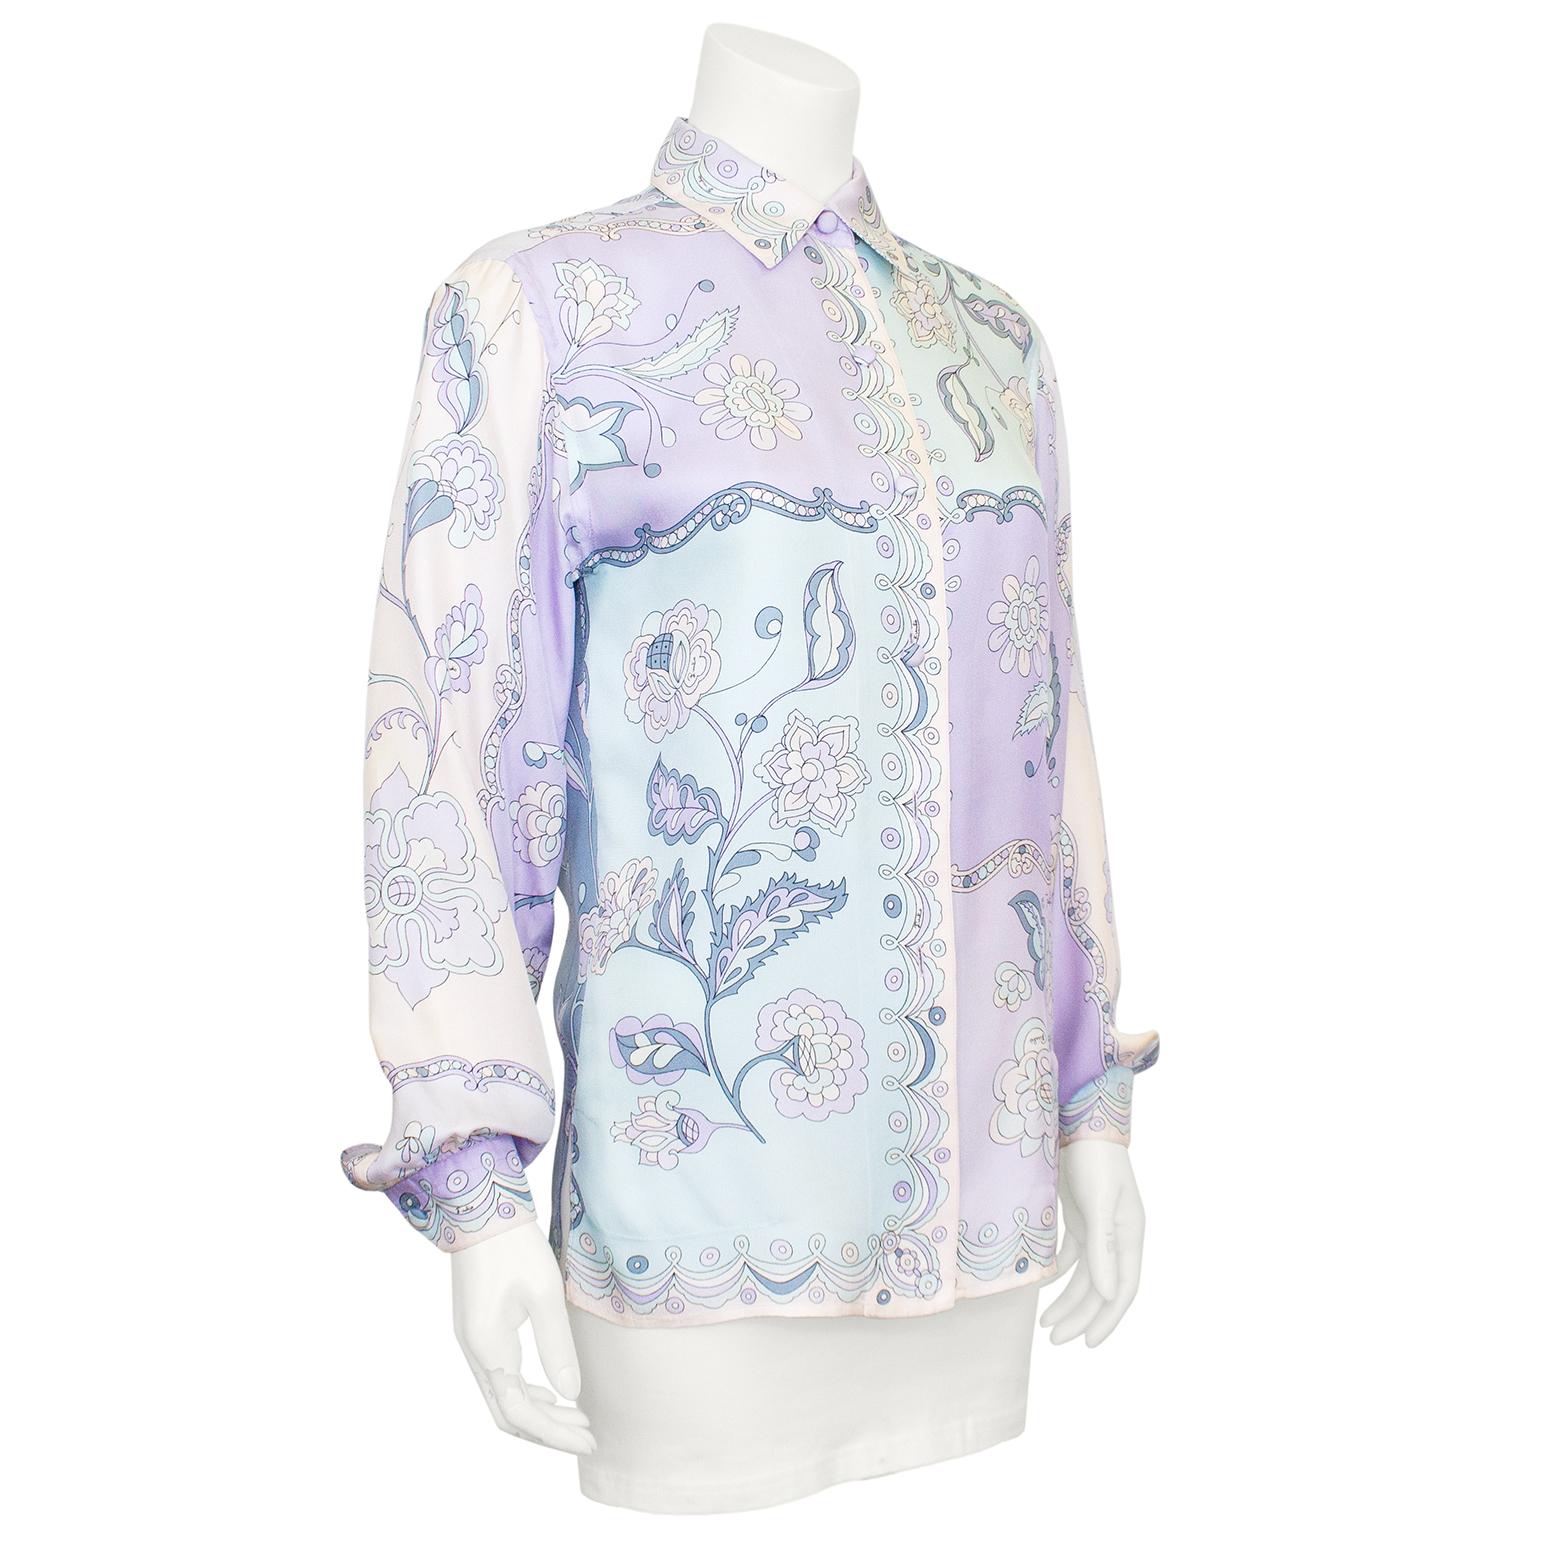 Emilio Pucci silk shirt from the 1990s. A pastel mix of pale purples, blues and pinks in an abstract 1960's inspired floral print. Billowy bishop sleeves and slits at hem of both side seams for a relaxed look. Signed fabric. Excellent vintage